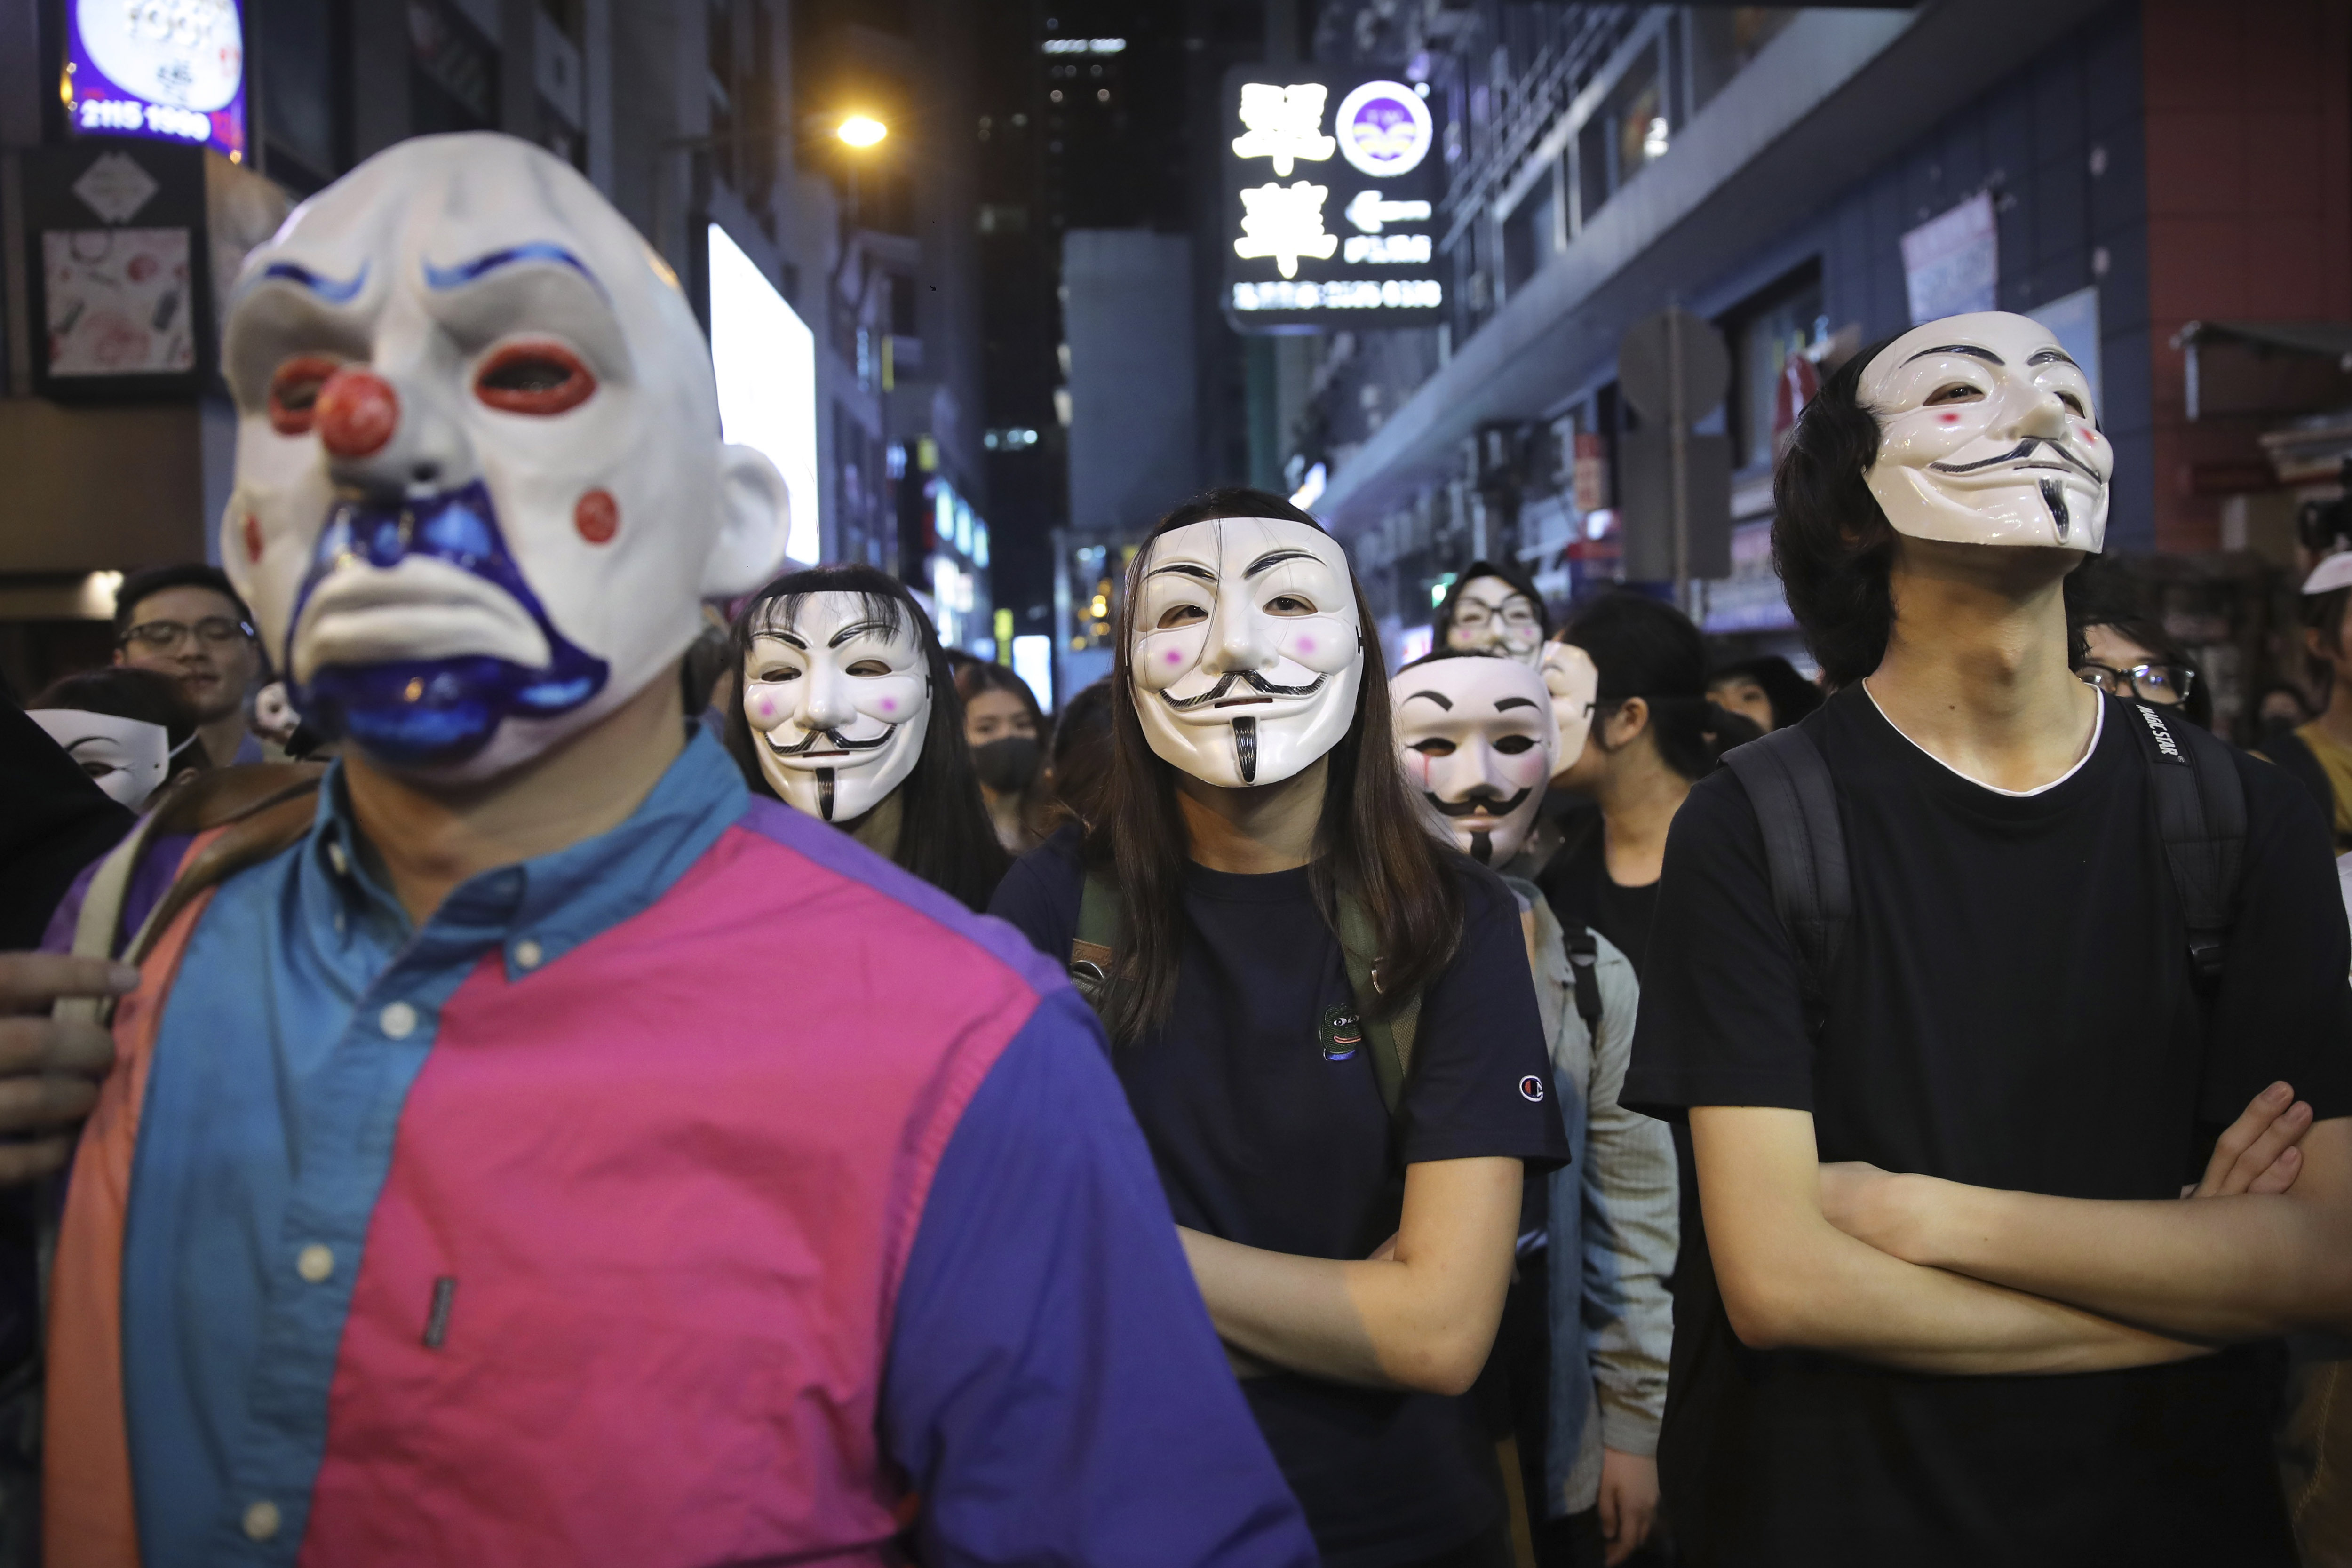 People in Guy Fawkes masks gather on a street in Hong Kong, Thursday, Oct. 31, 2019. Hong Kong authorities are bracing as pro-democracy protesters urged people on Thursday to celebrate Halloween by wearing masks on a march in defiance of a government ban on face coverings. (AP Photo/Kin Cheung)